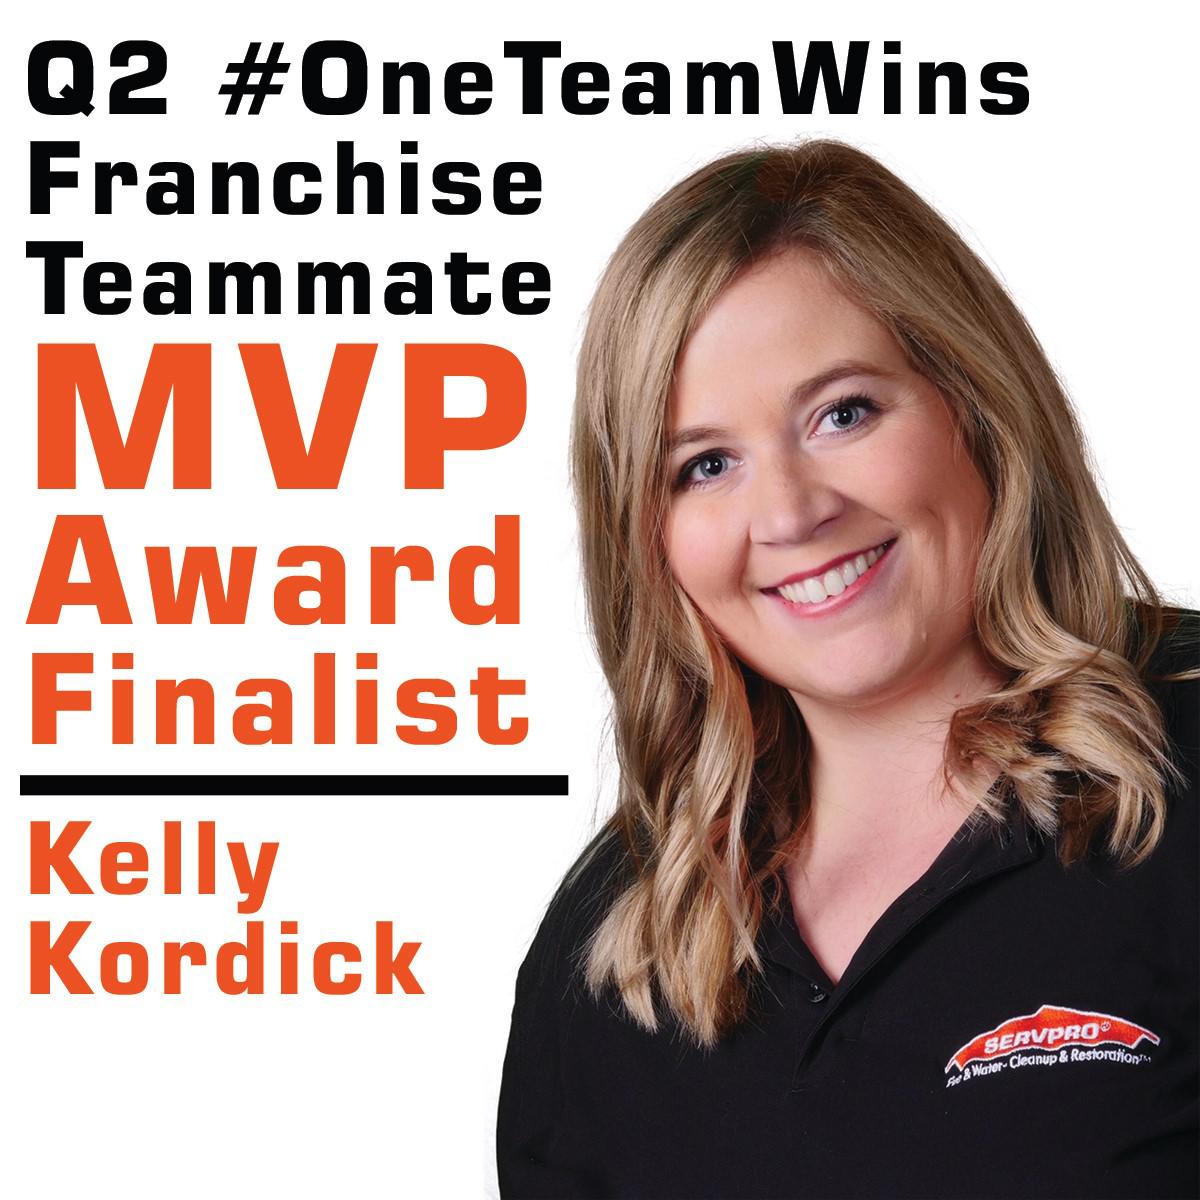 Kelly is a true team player, always hustling, helping, and enthusiastic about SERVPRO. We couldn't be more proud! We are rooting for her as a finalist of the Q2 #OneTeamWins Franchise Teammate MVP Award! #SERVPRO